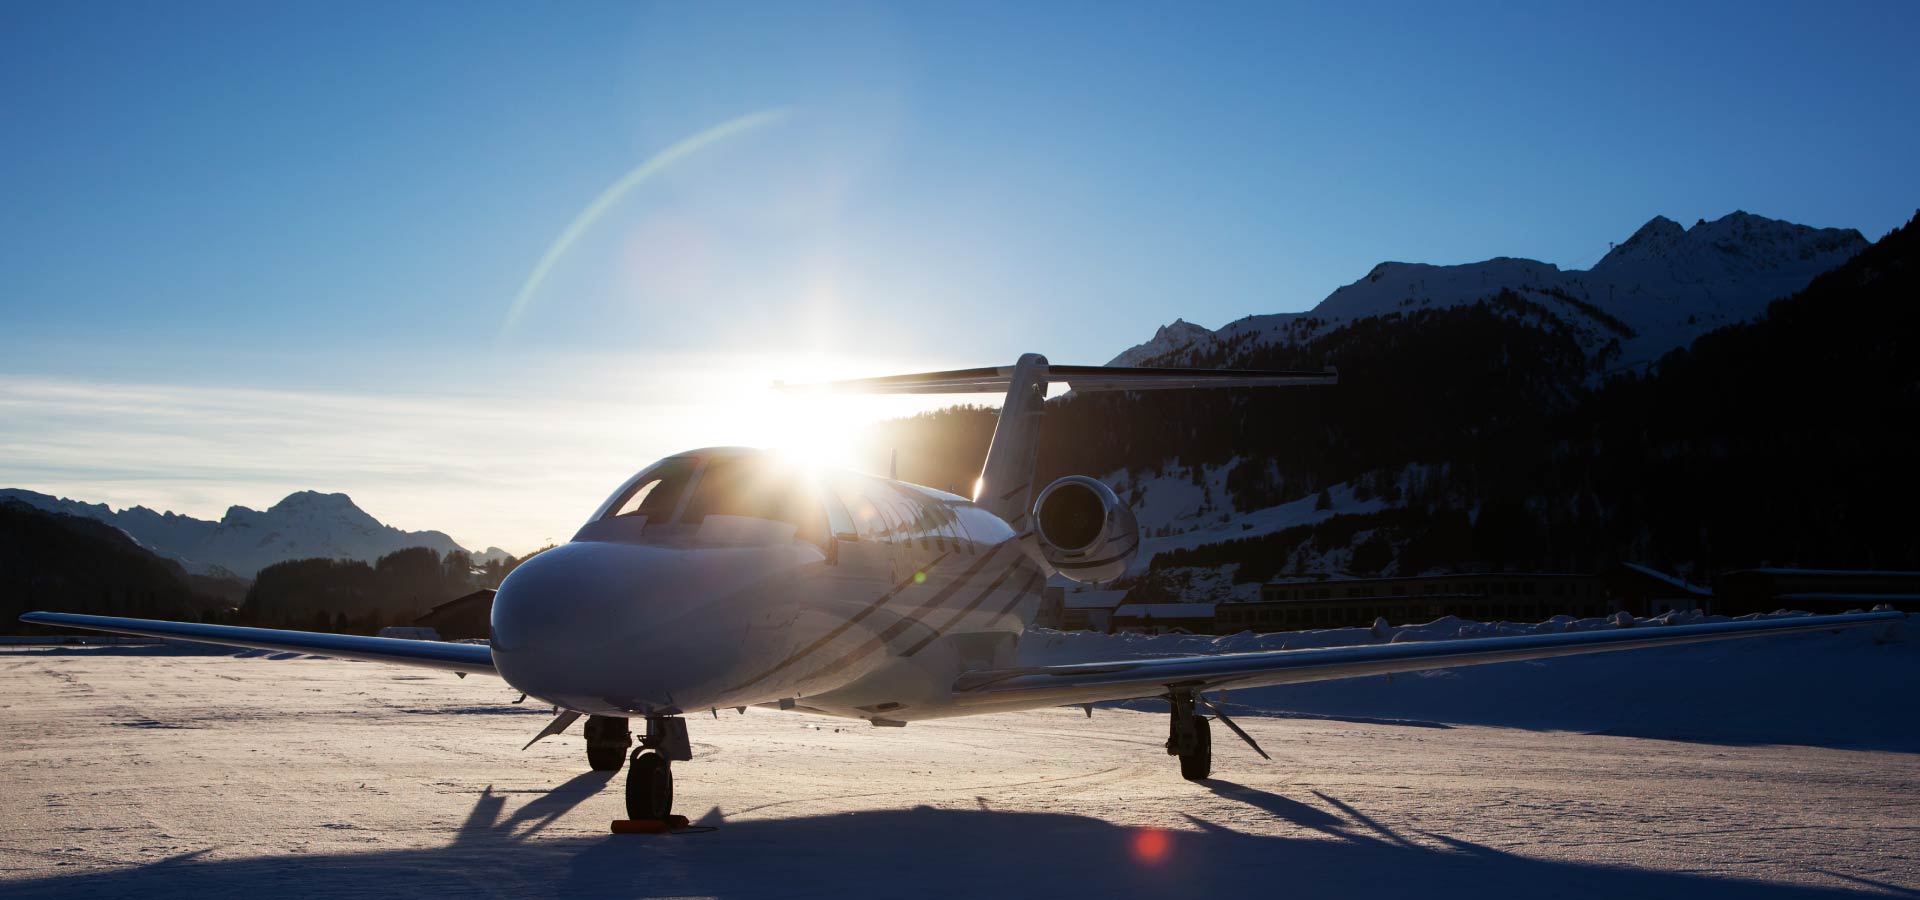 Light jet parked in the mountains